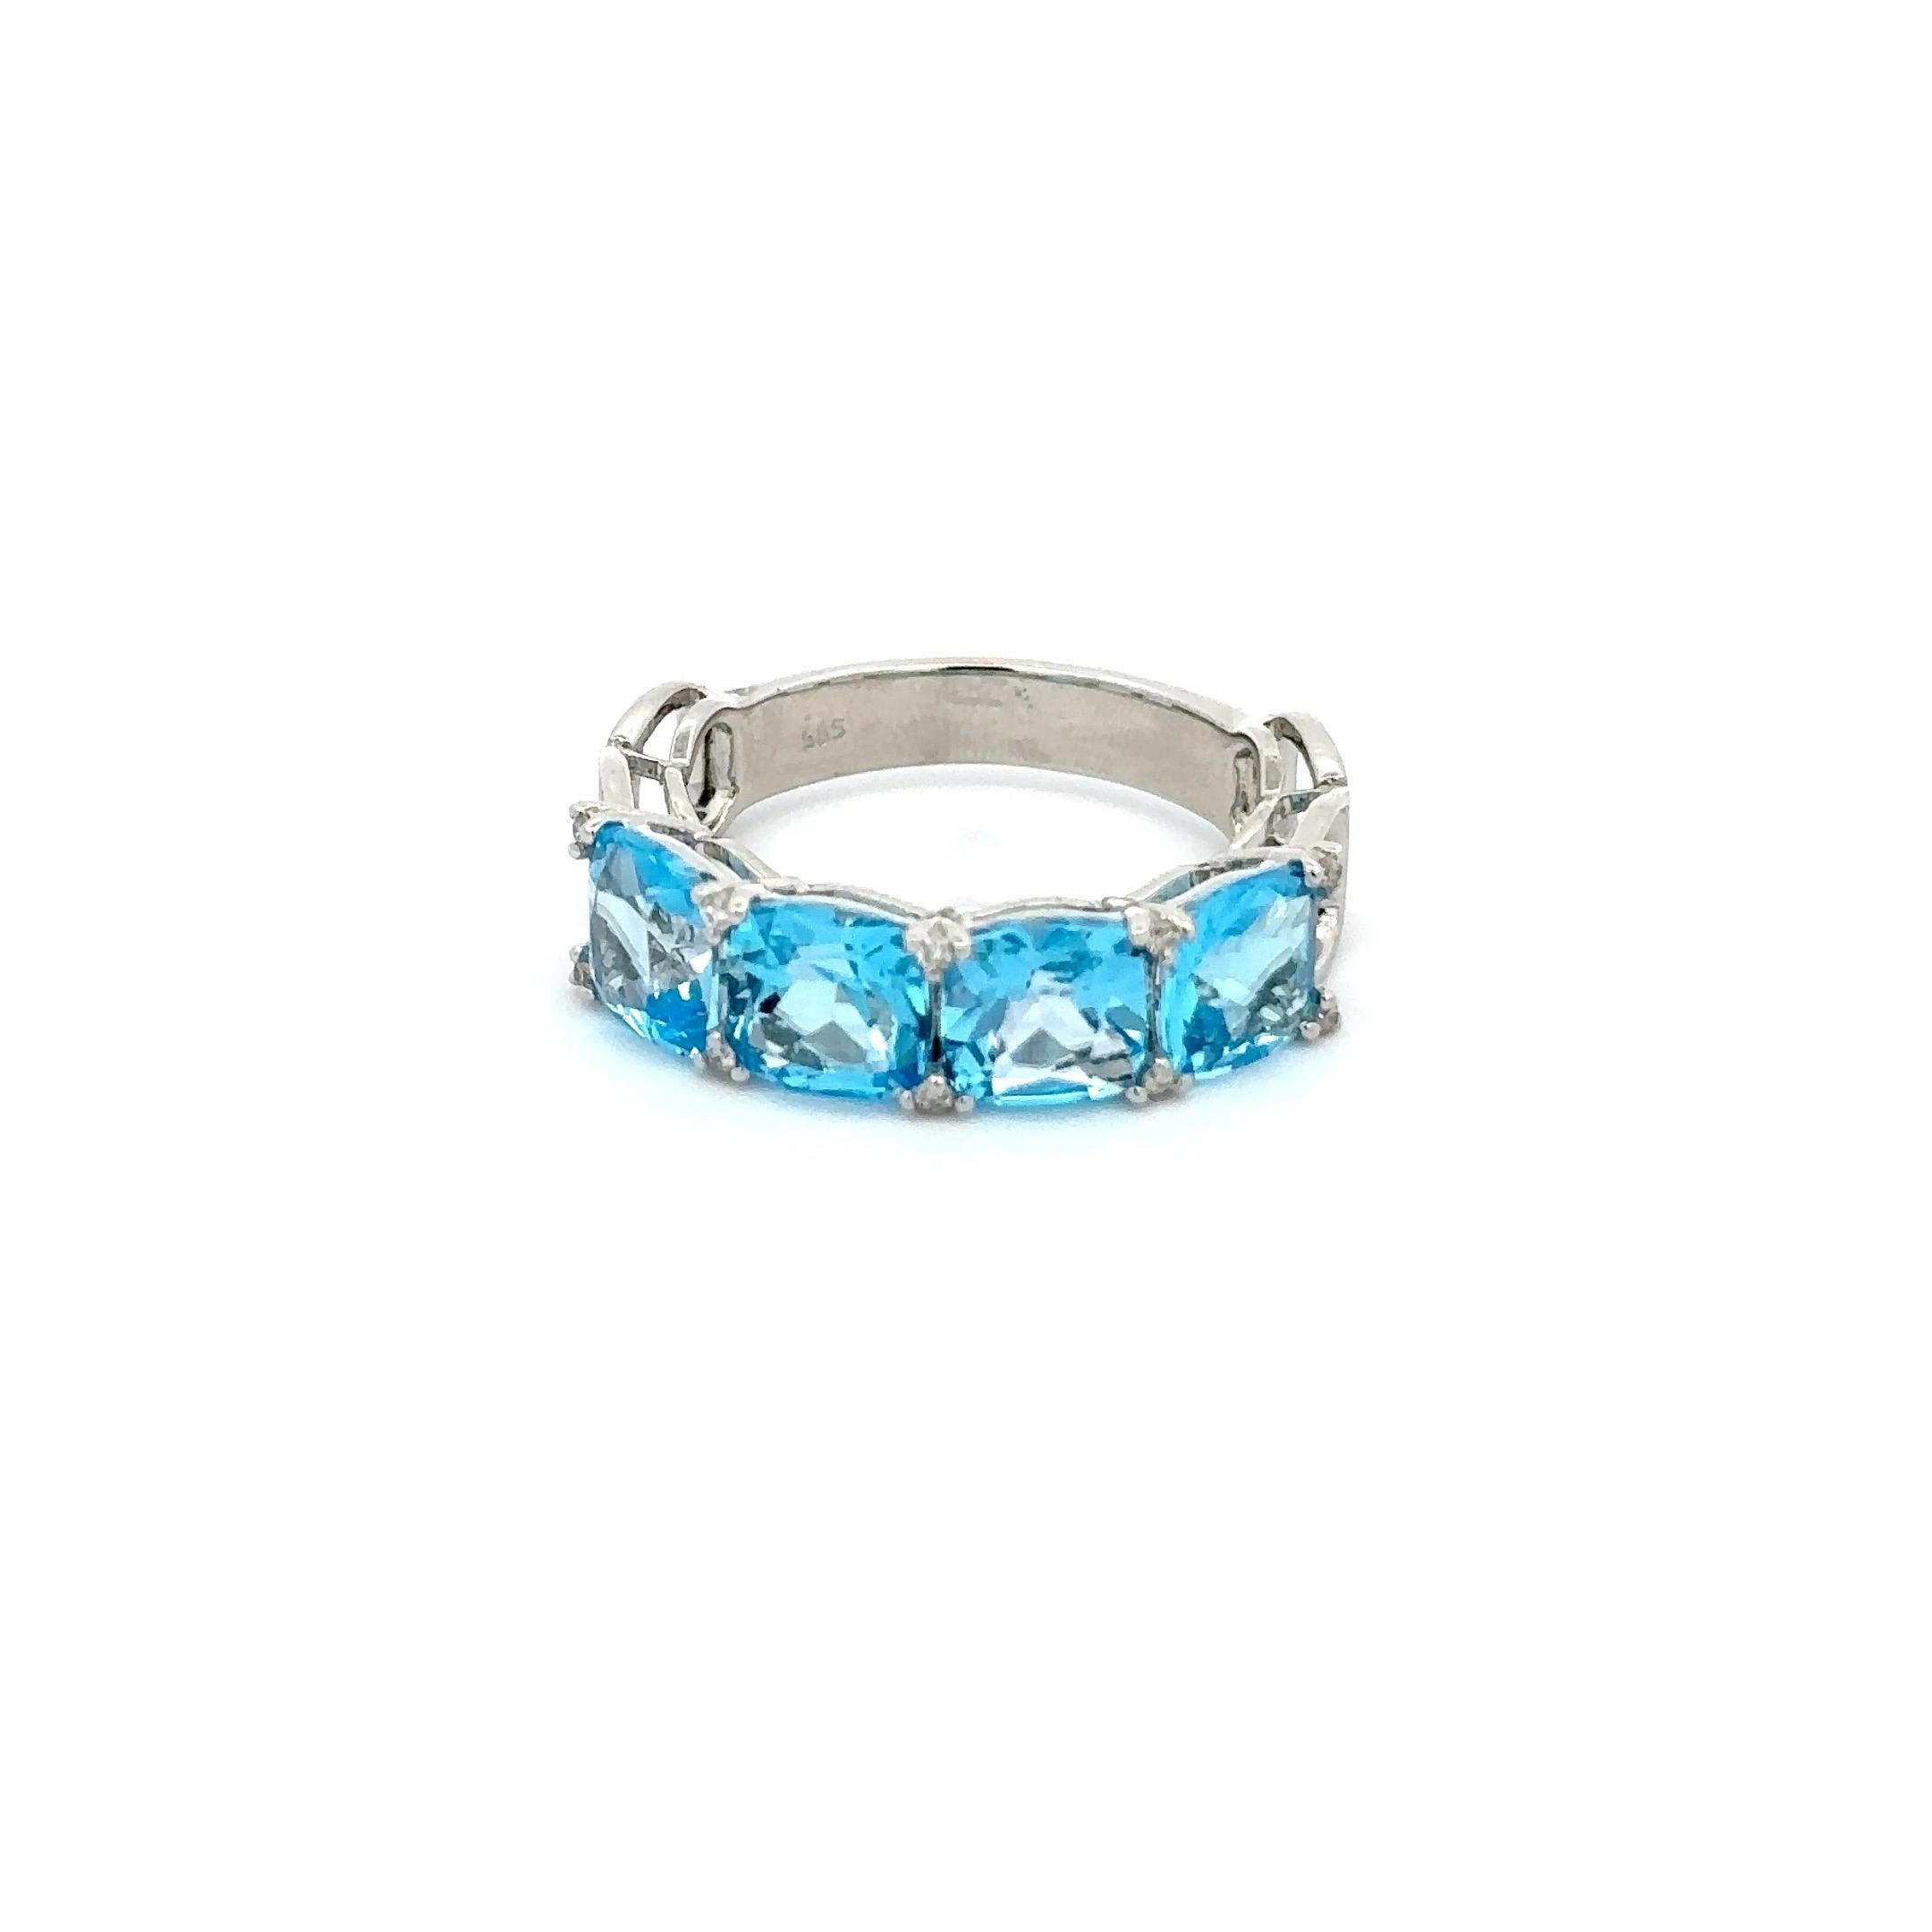 For Sale:  Half Eternity 4.47 Ct Cushion Cut Blue Topaz Band Ring in 14k Solid White Gold 7